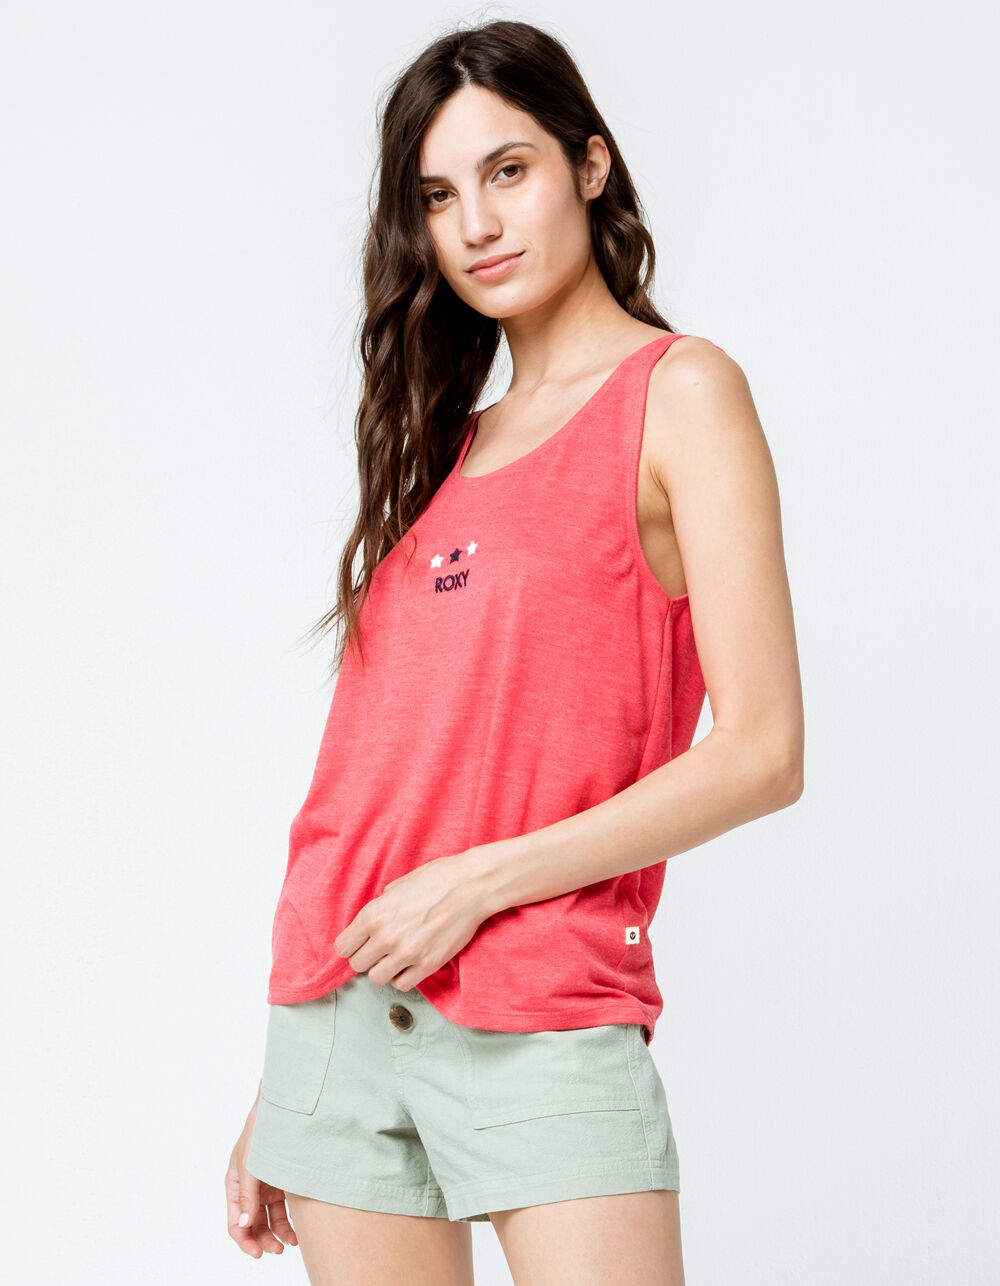 ROXY Summer Of Pop Womens Tank Top image number 1